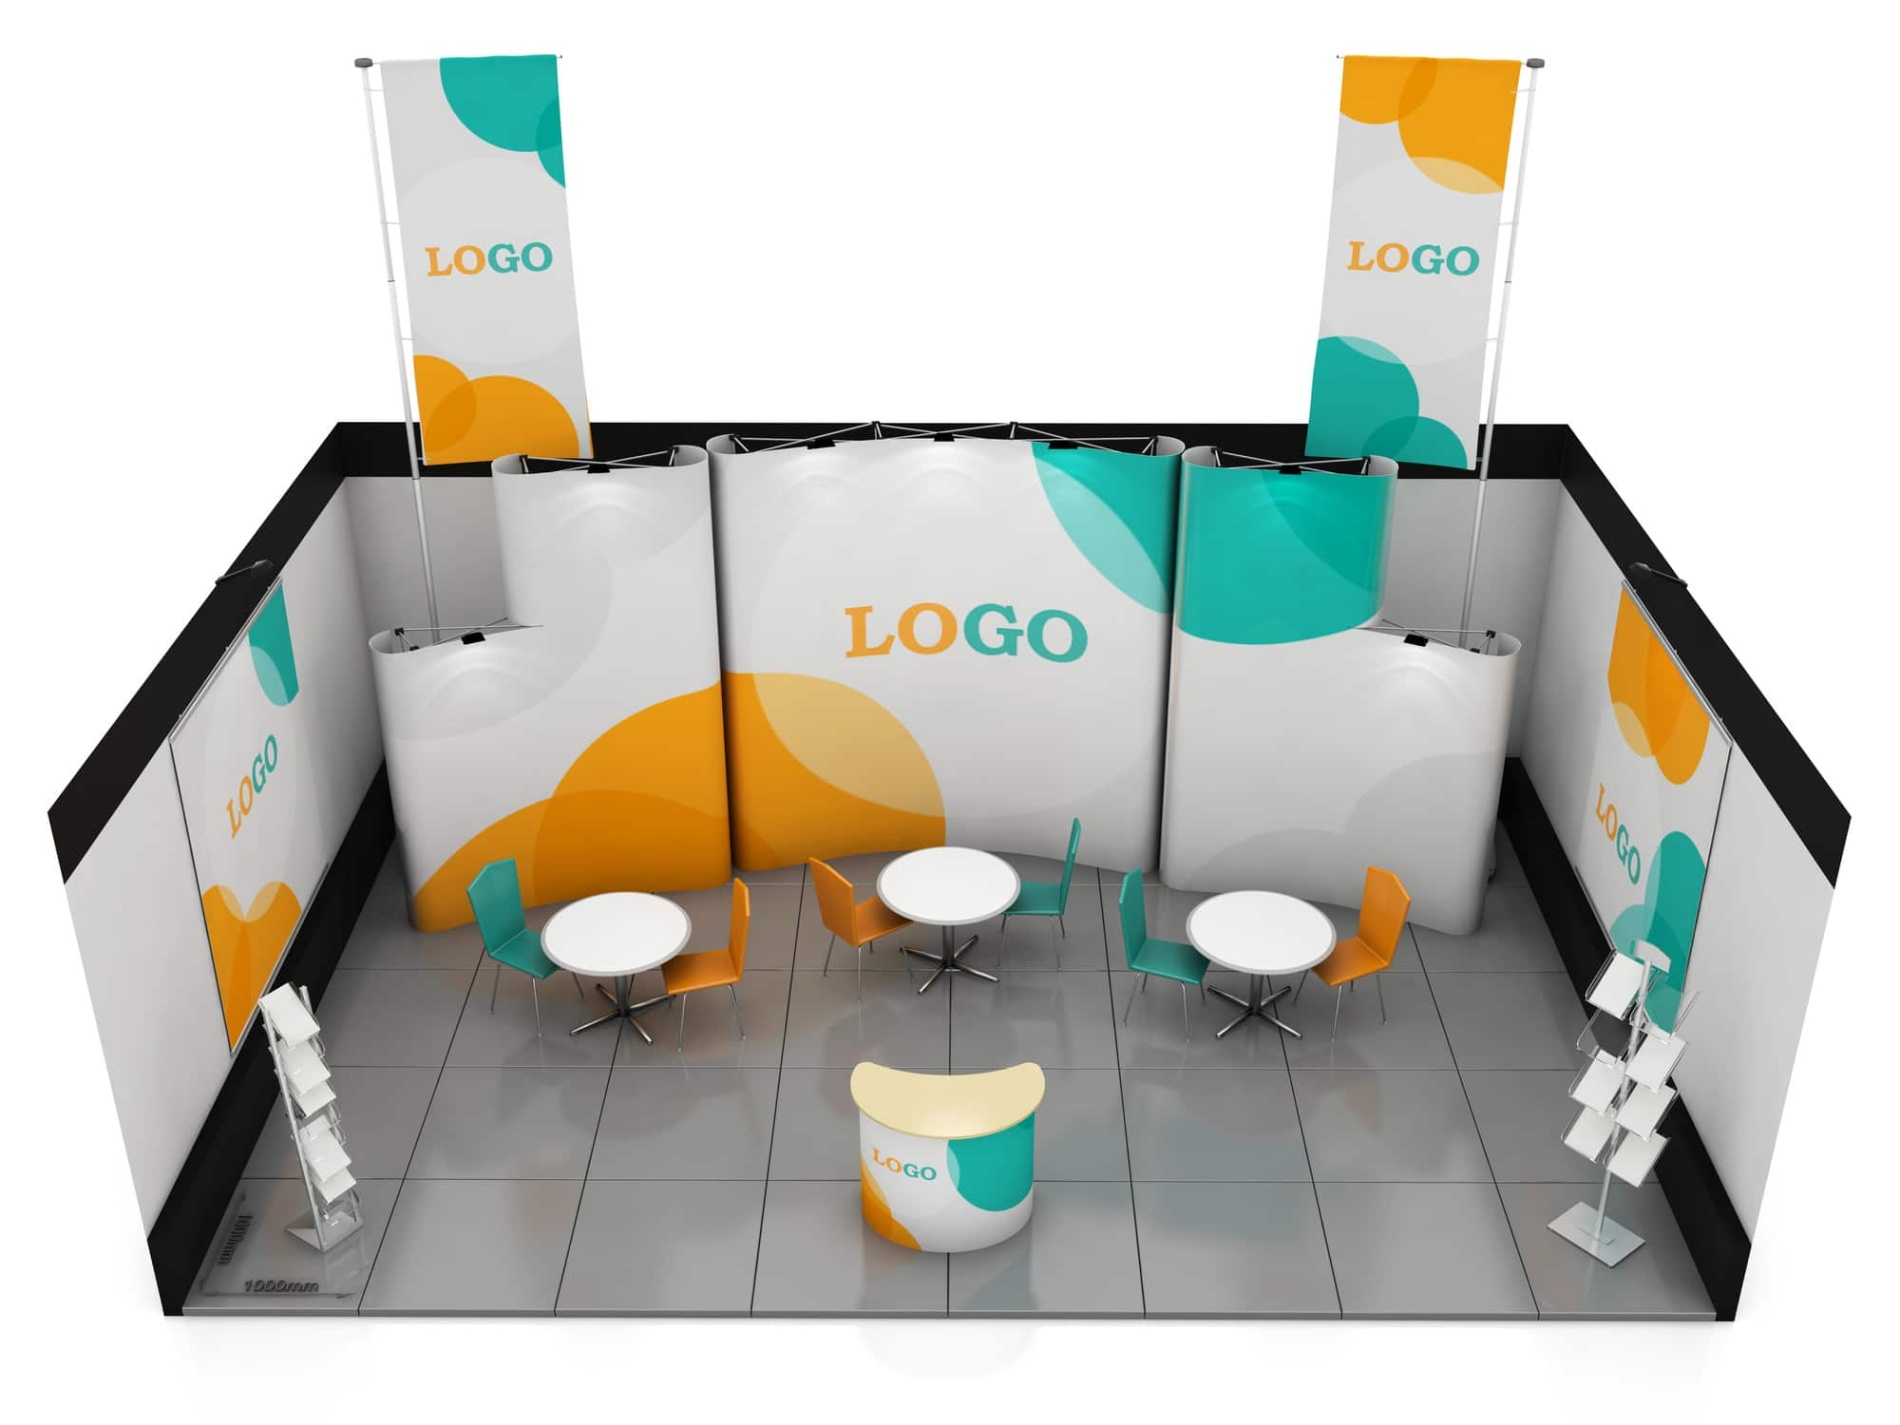 Get Inspired: 10 Cool Booth Design Ideas To Make Your Event Stand Out